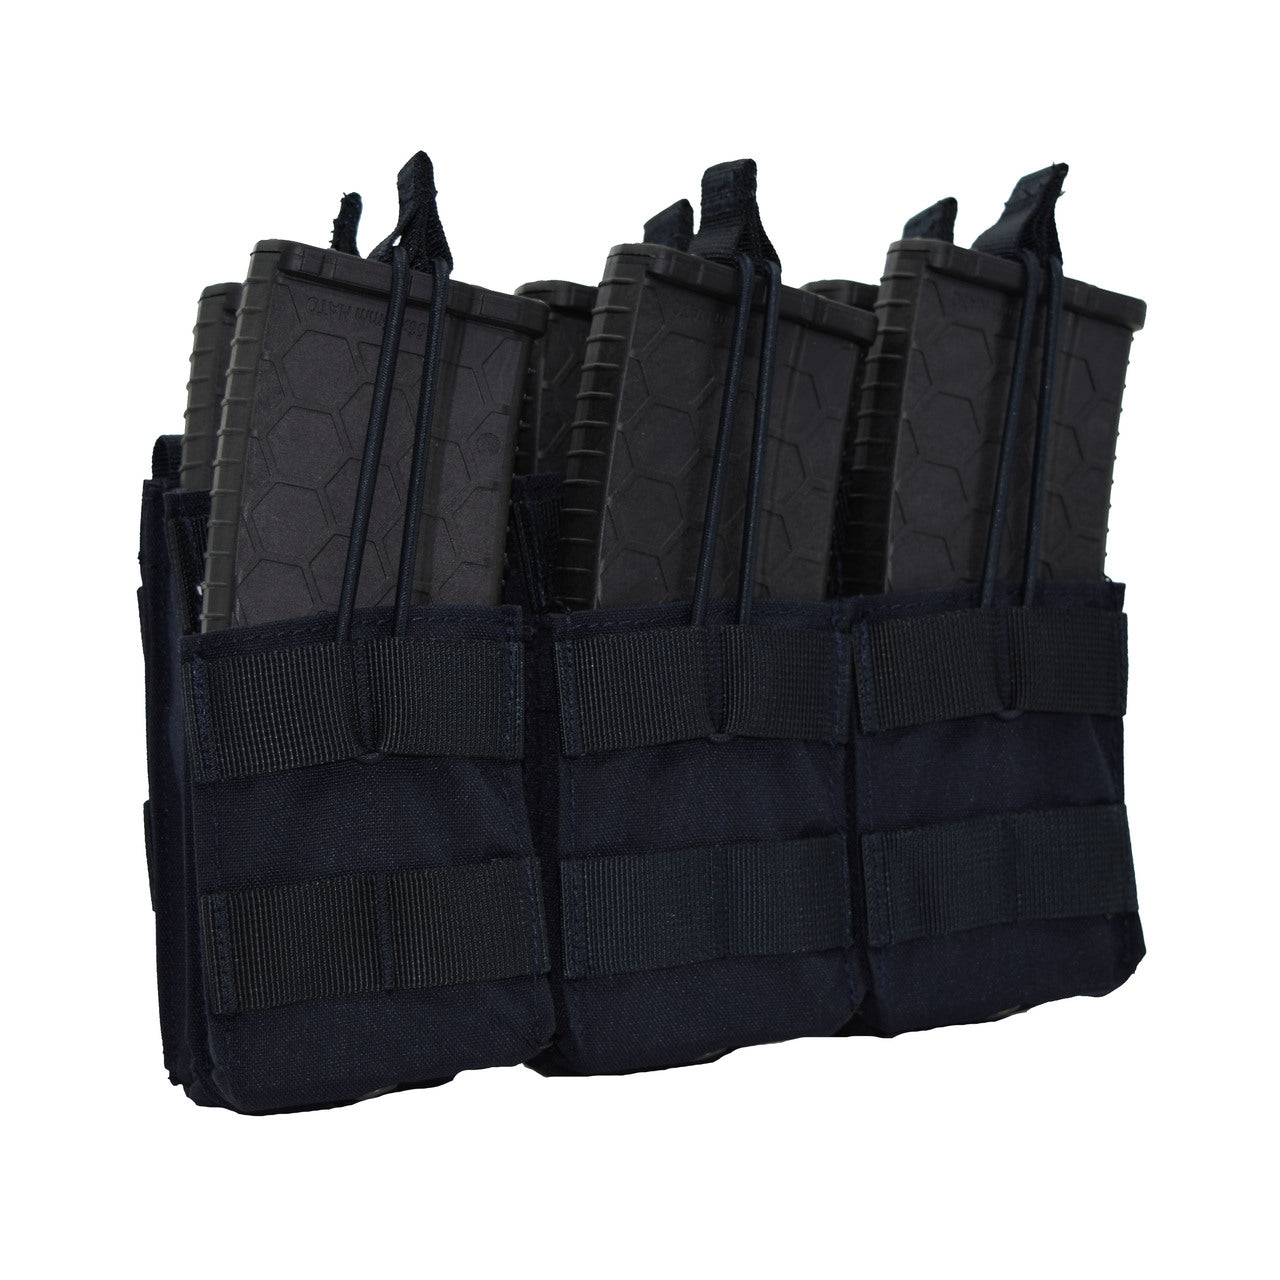 Four Shellback Tactical Triple Stacker Open Top M4 Mag Pouches on a white background.